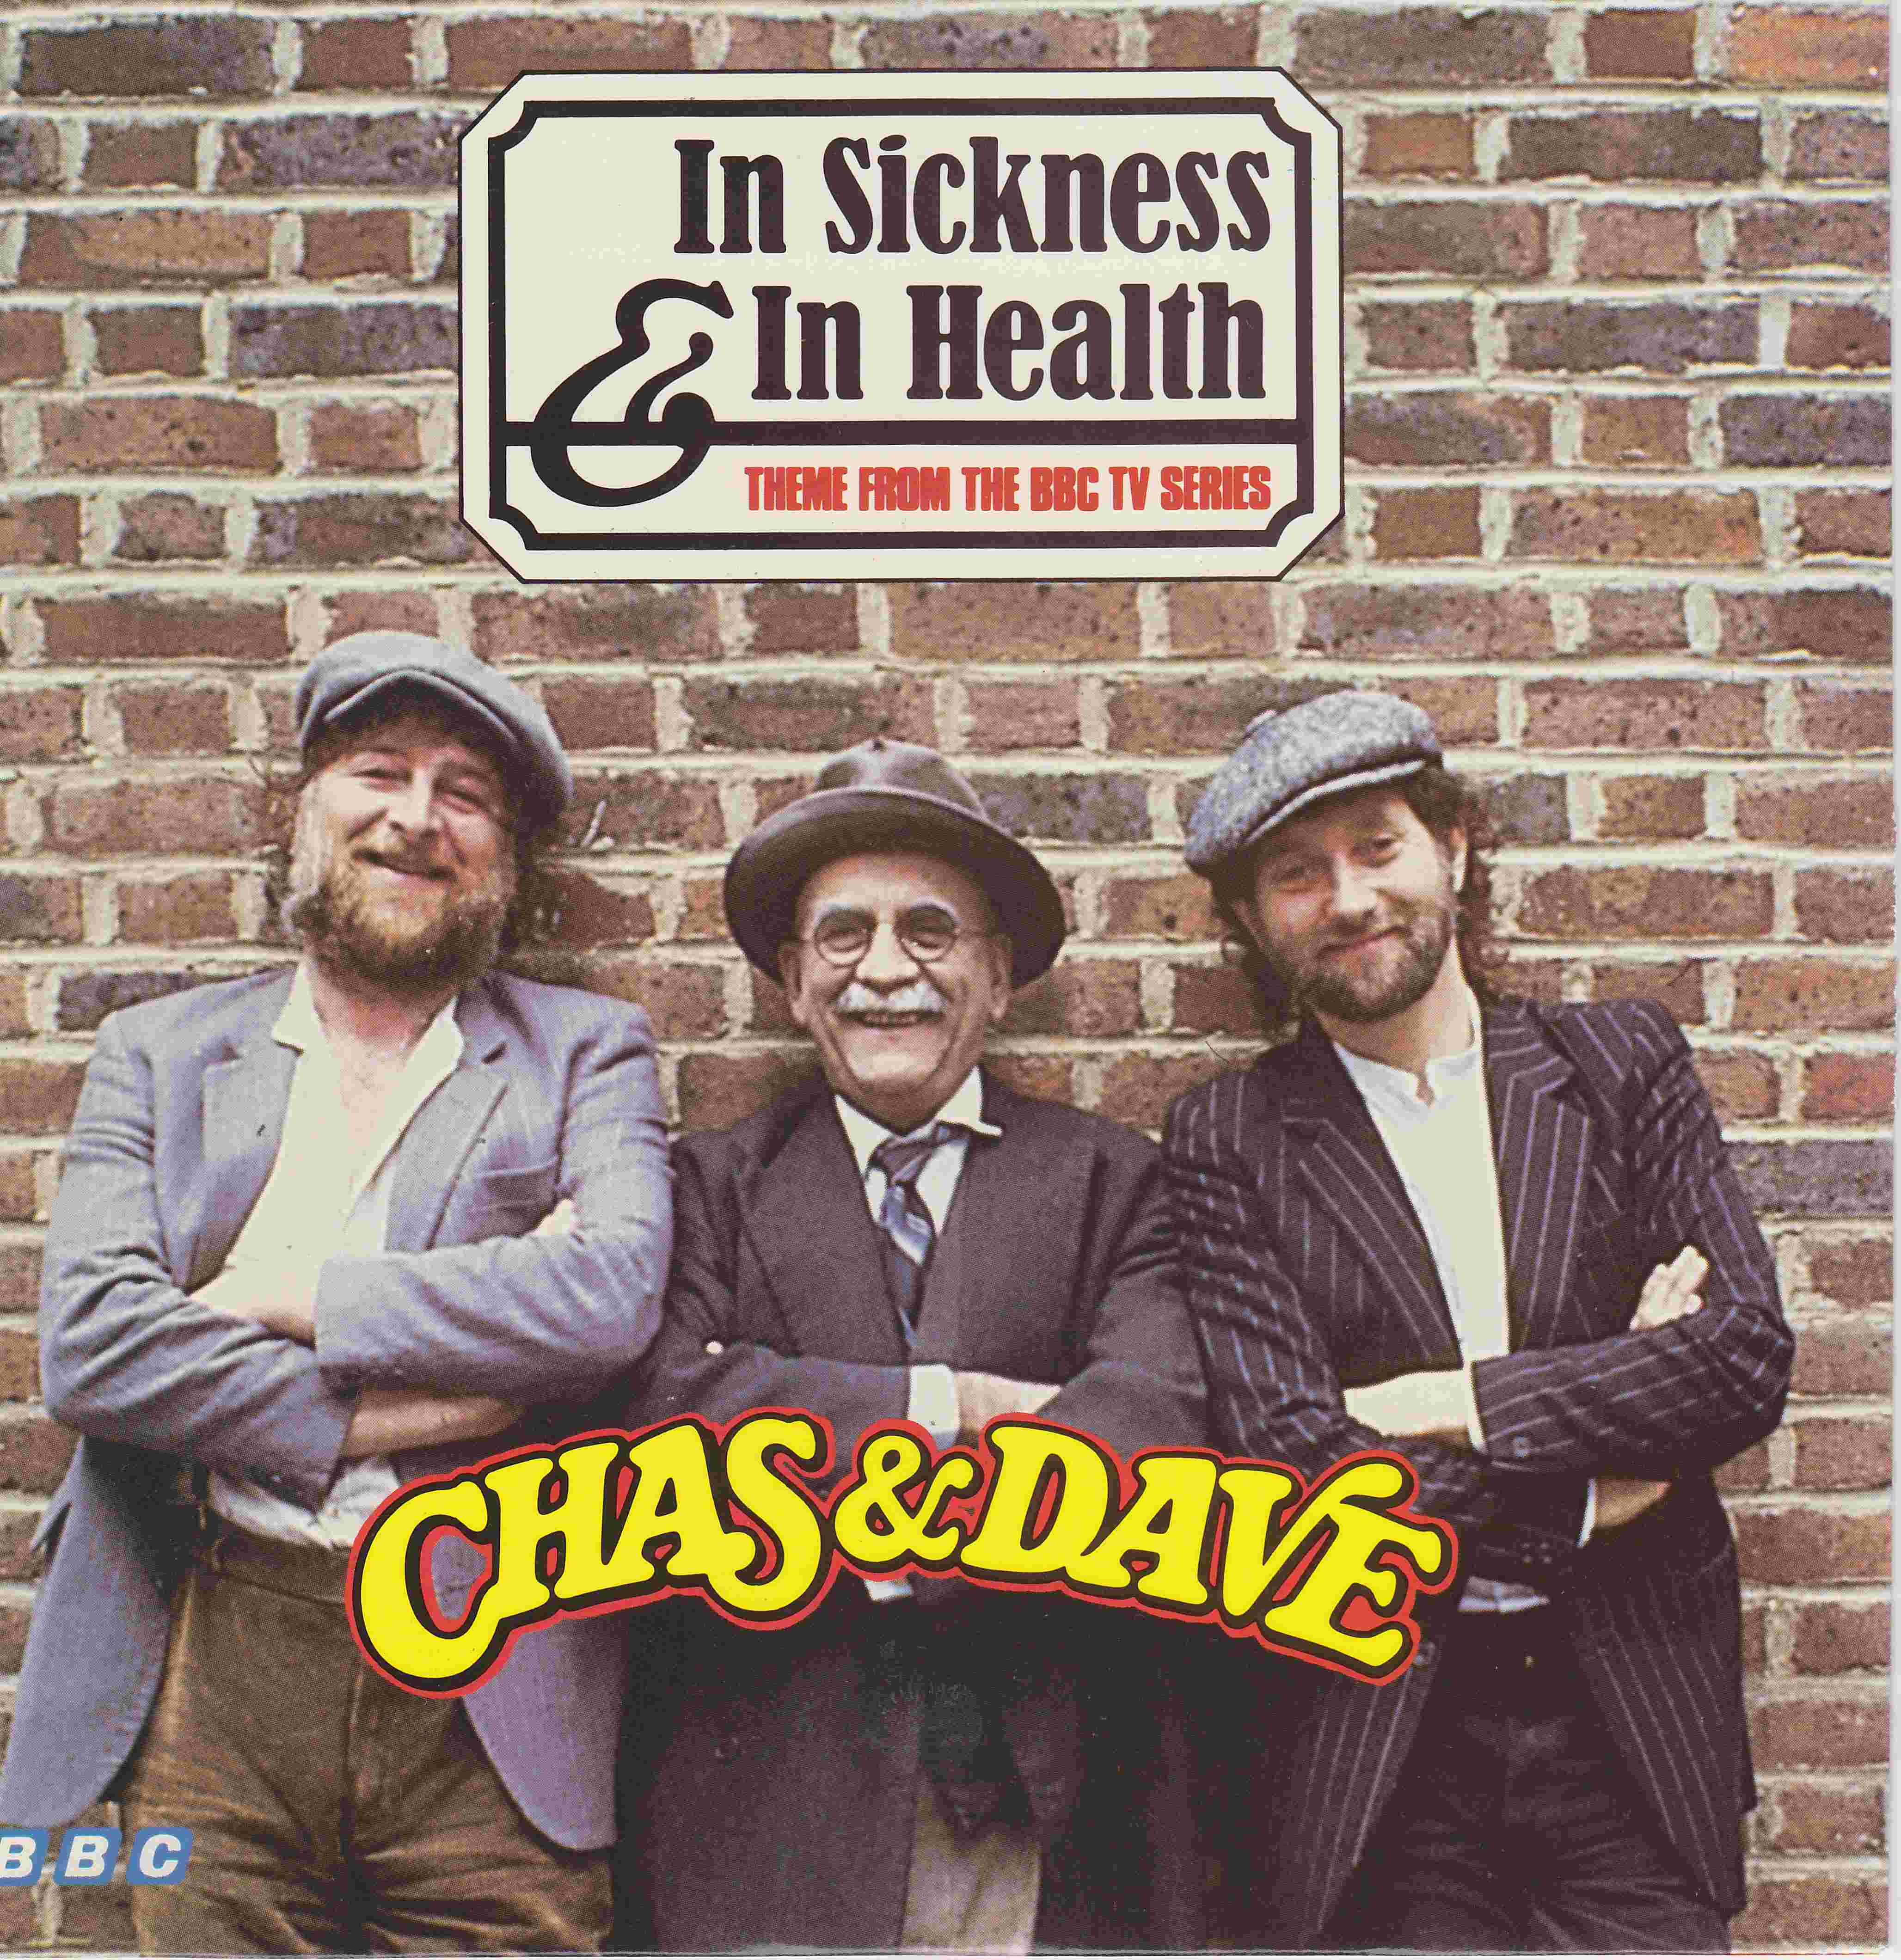 Picture of RESL 176 In sickness and in health by artist Chas \'n\' Dave from the BBC records and Tapes library